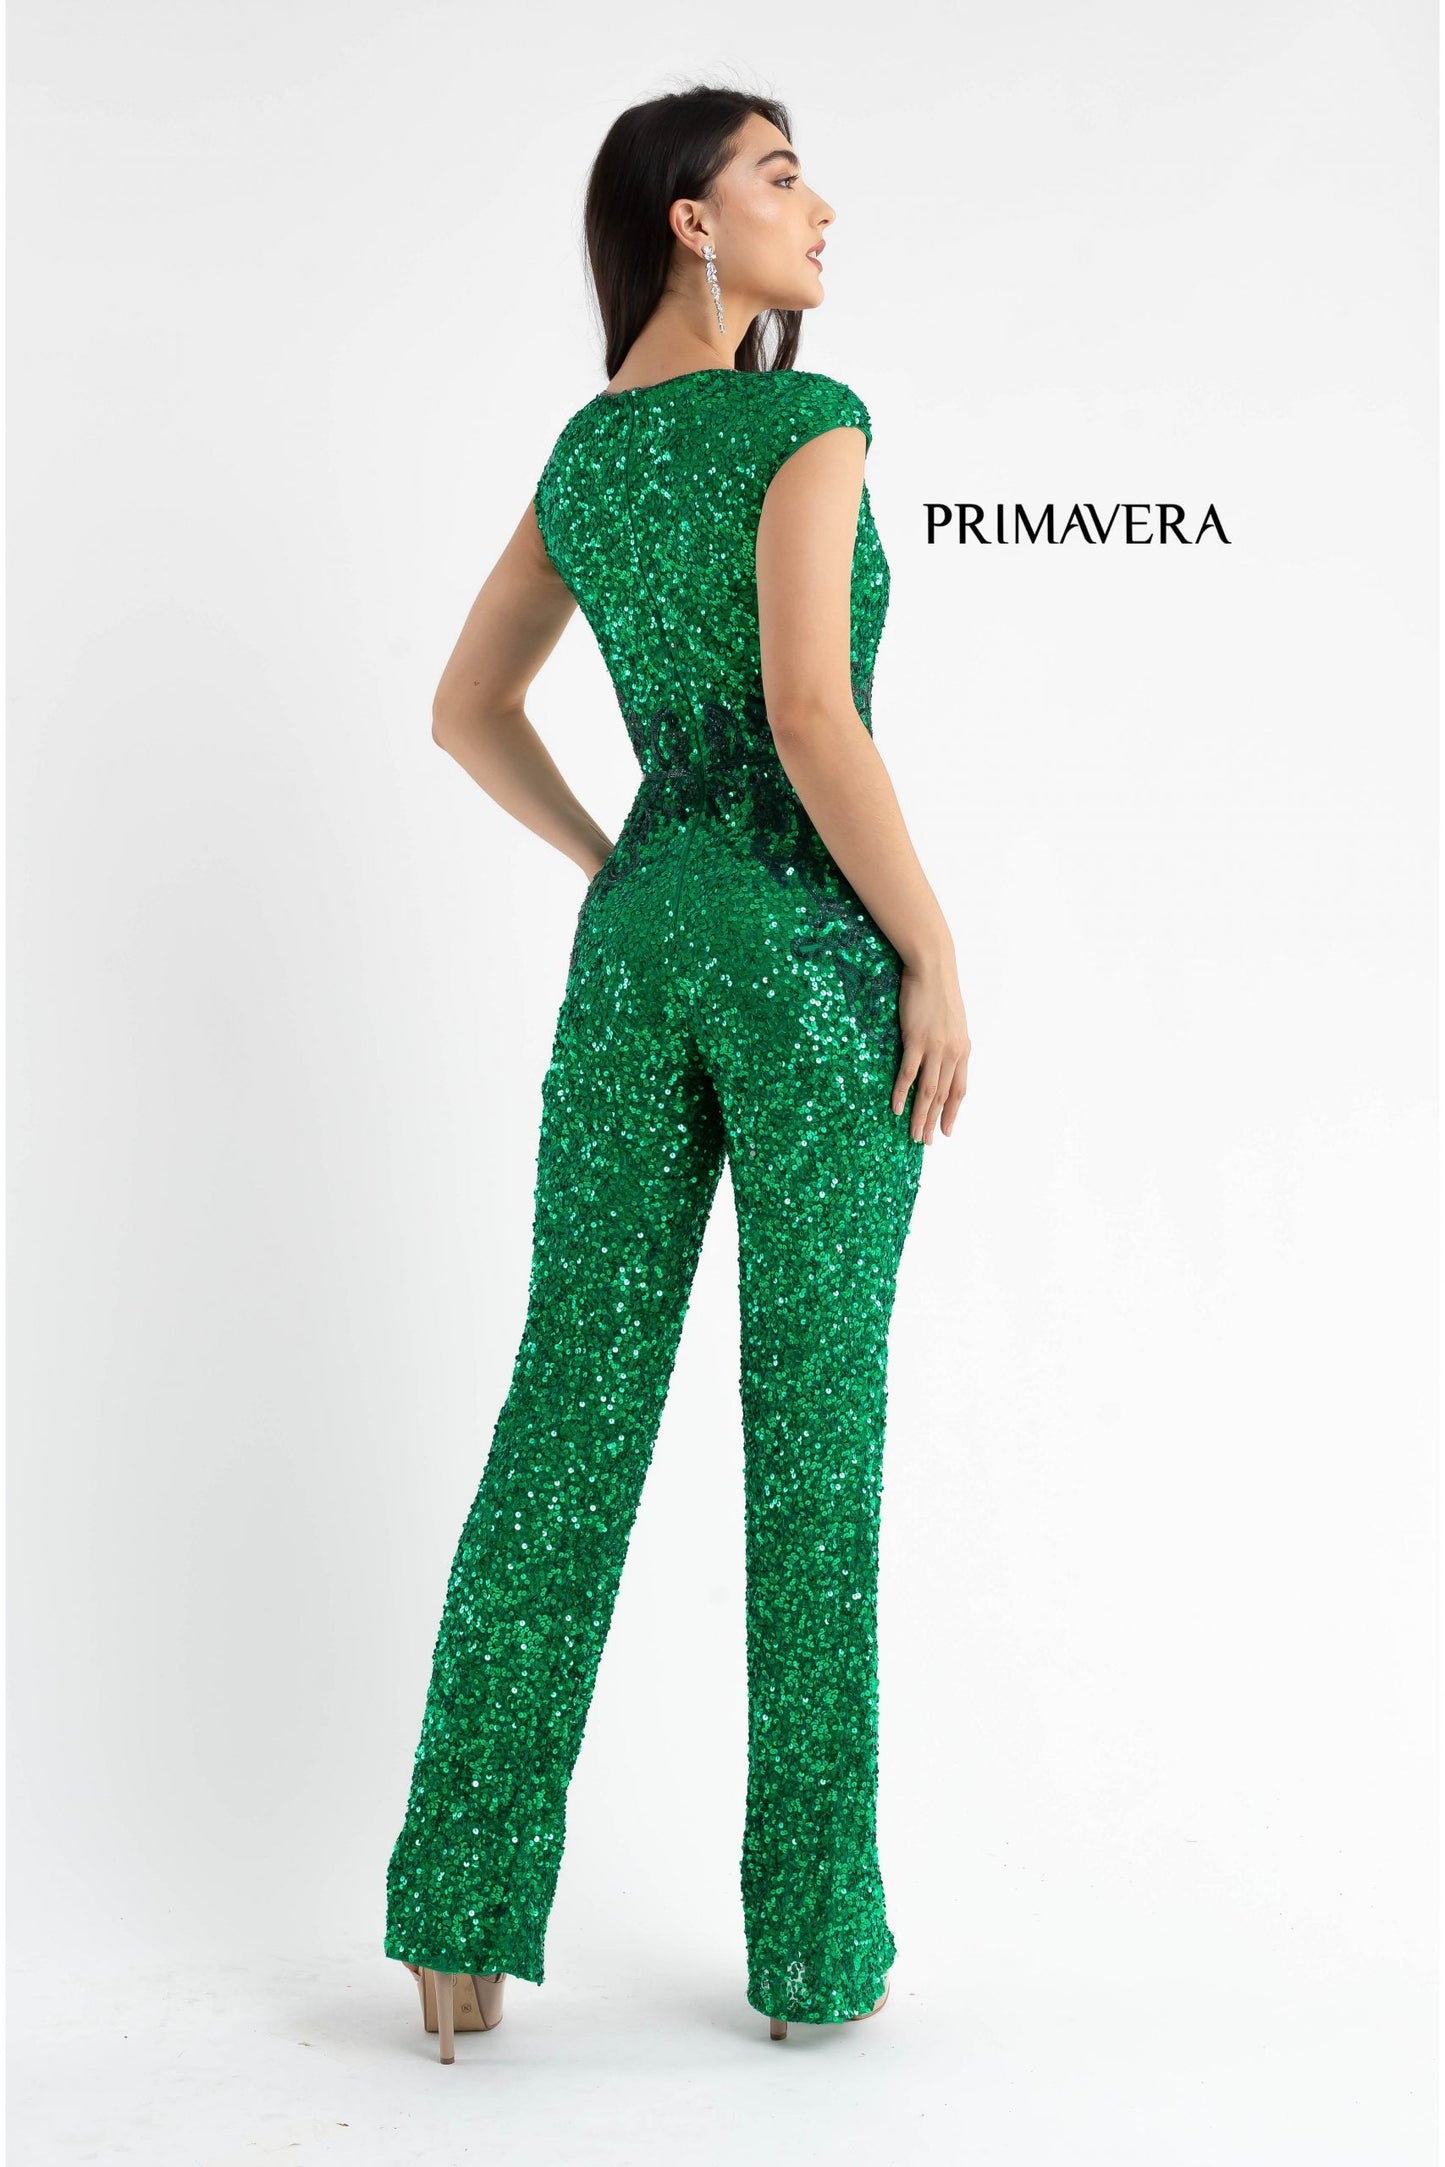 Primavera Couture 3775 Size 00, 4 Royal Blue Sequined Jumpsuit Beaded Waist and Hips Cap Sleeves